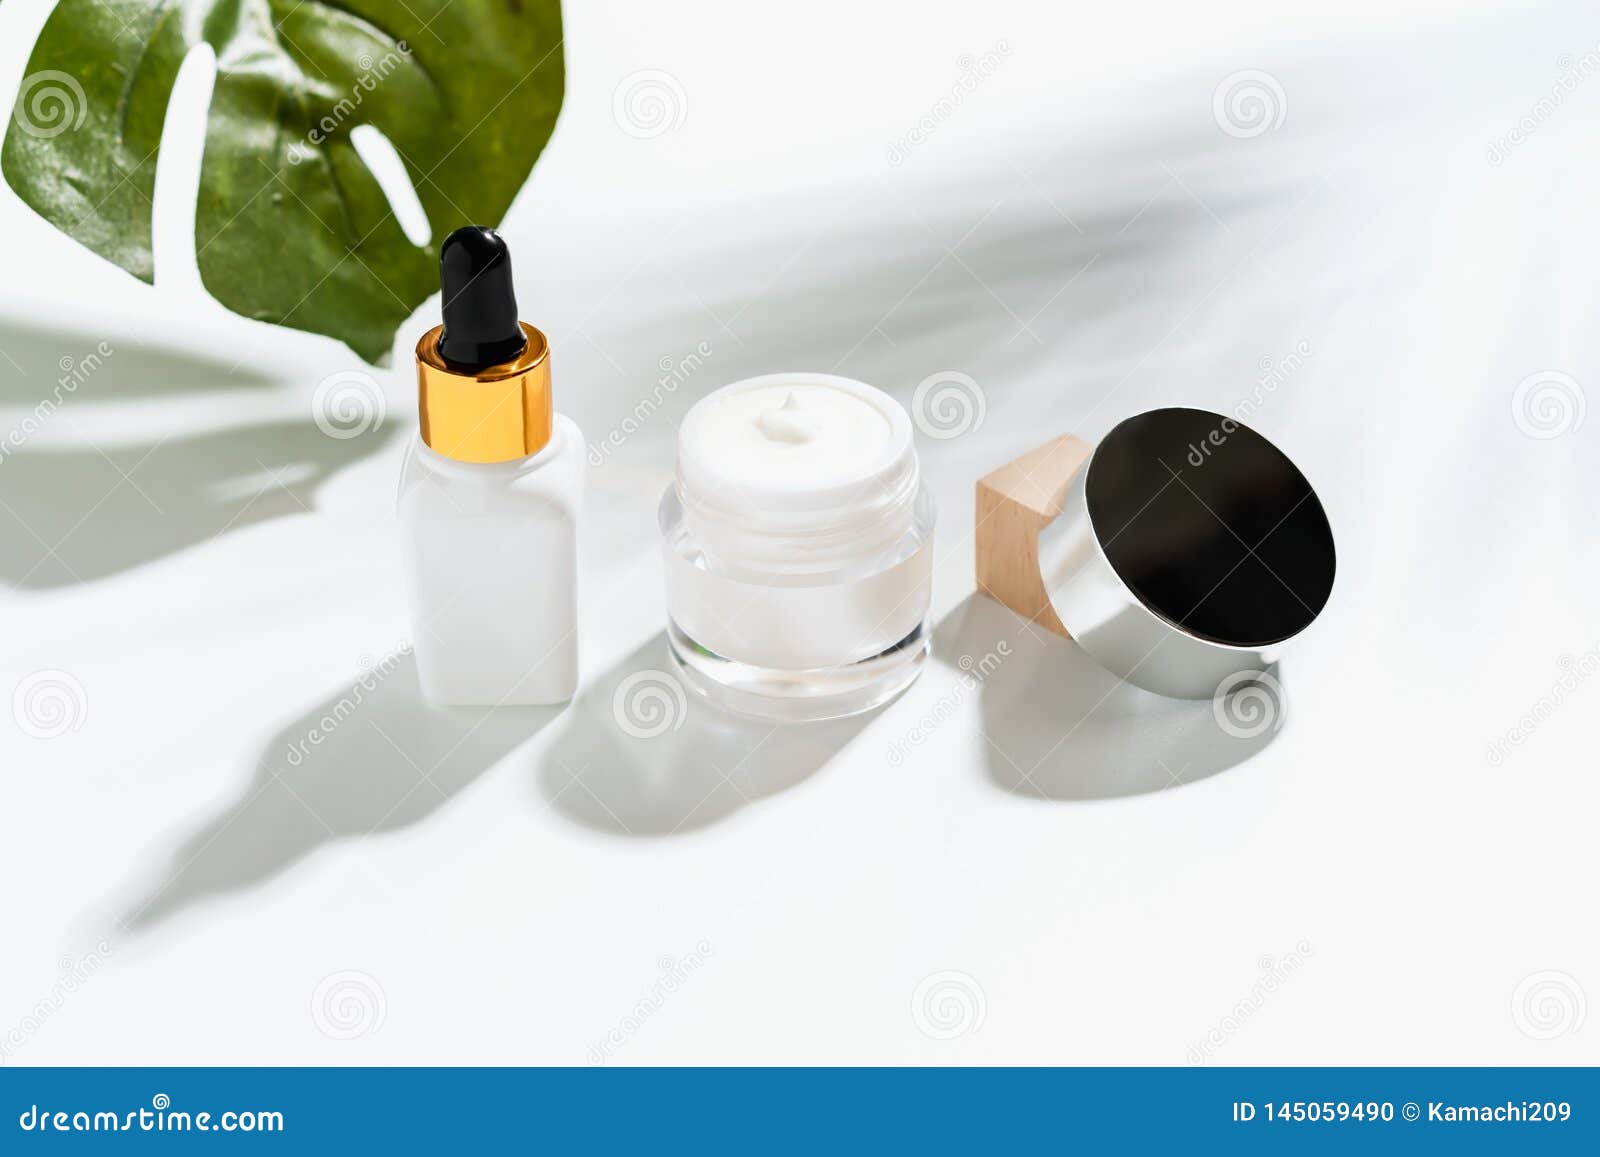 Download White Serum Bottle And Cream Jar, Mockup Of Beauty Product ...